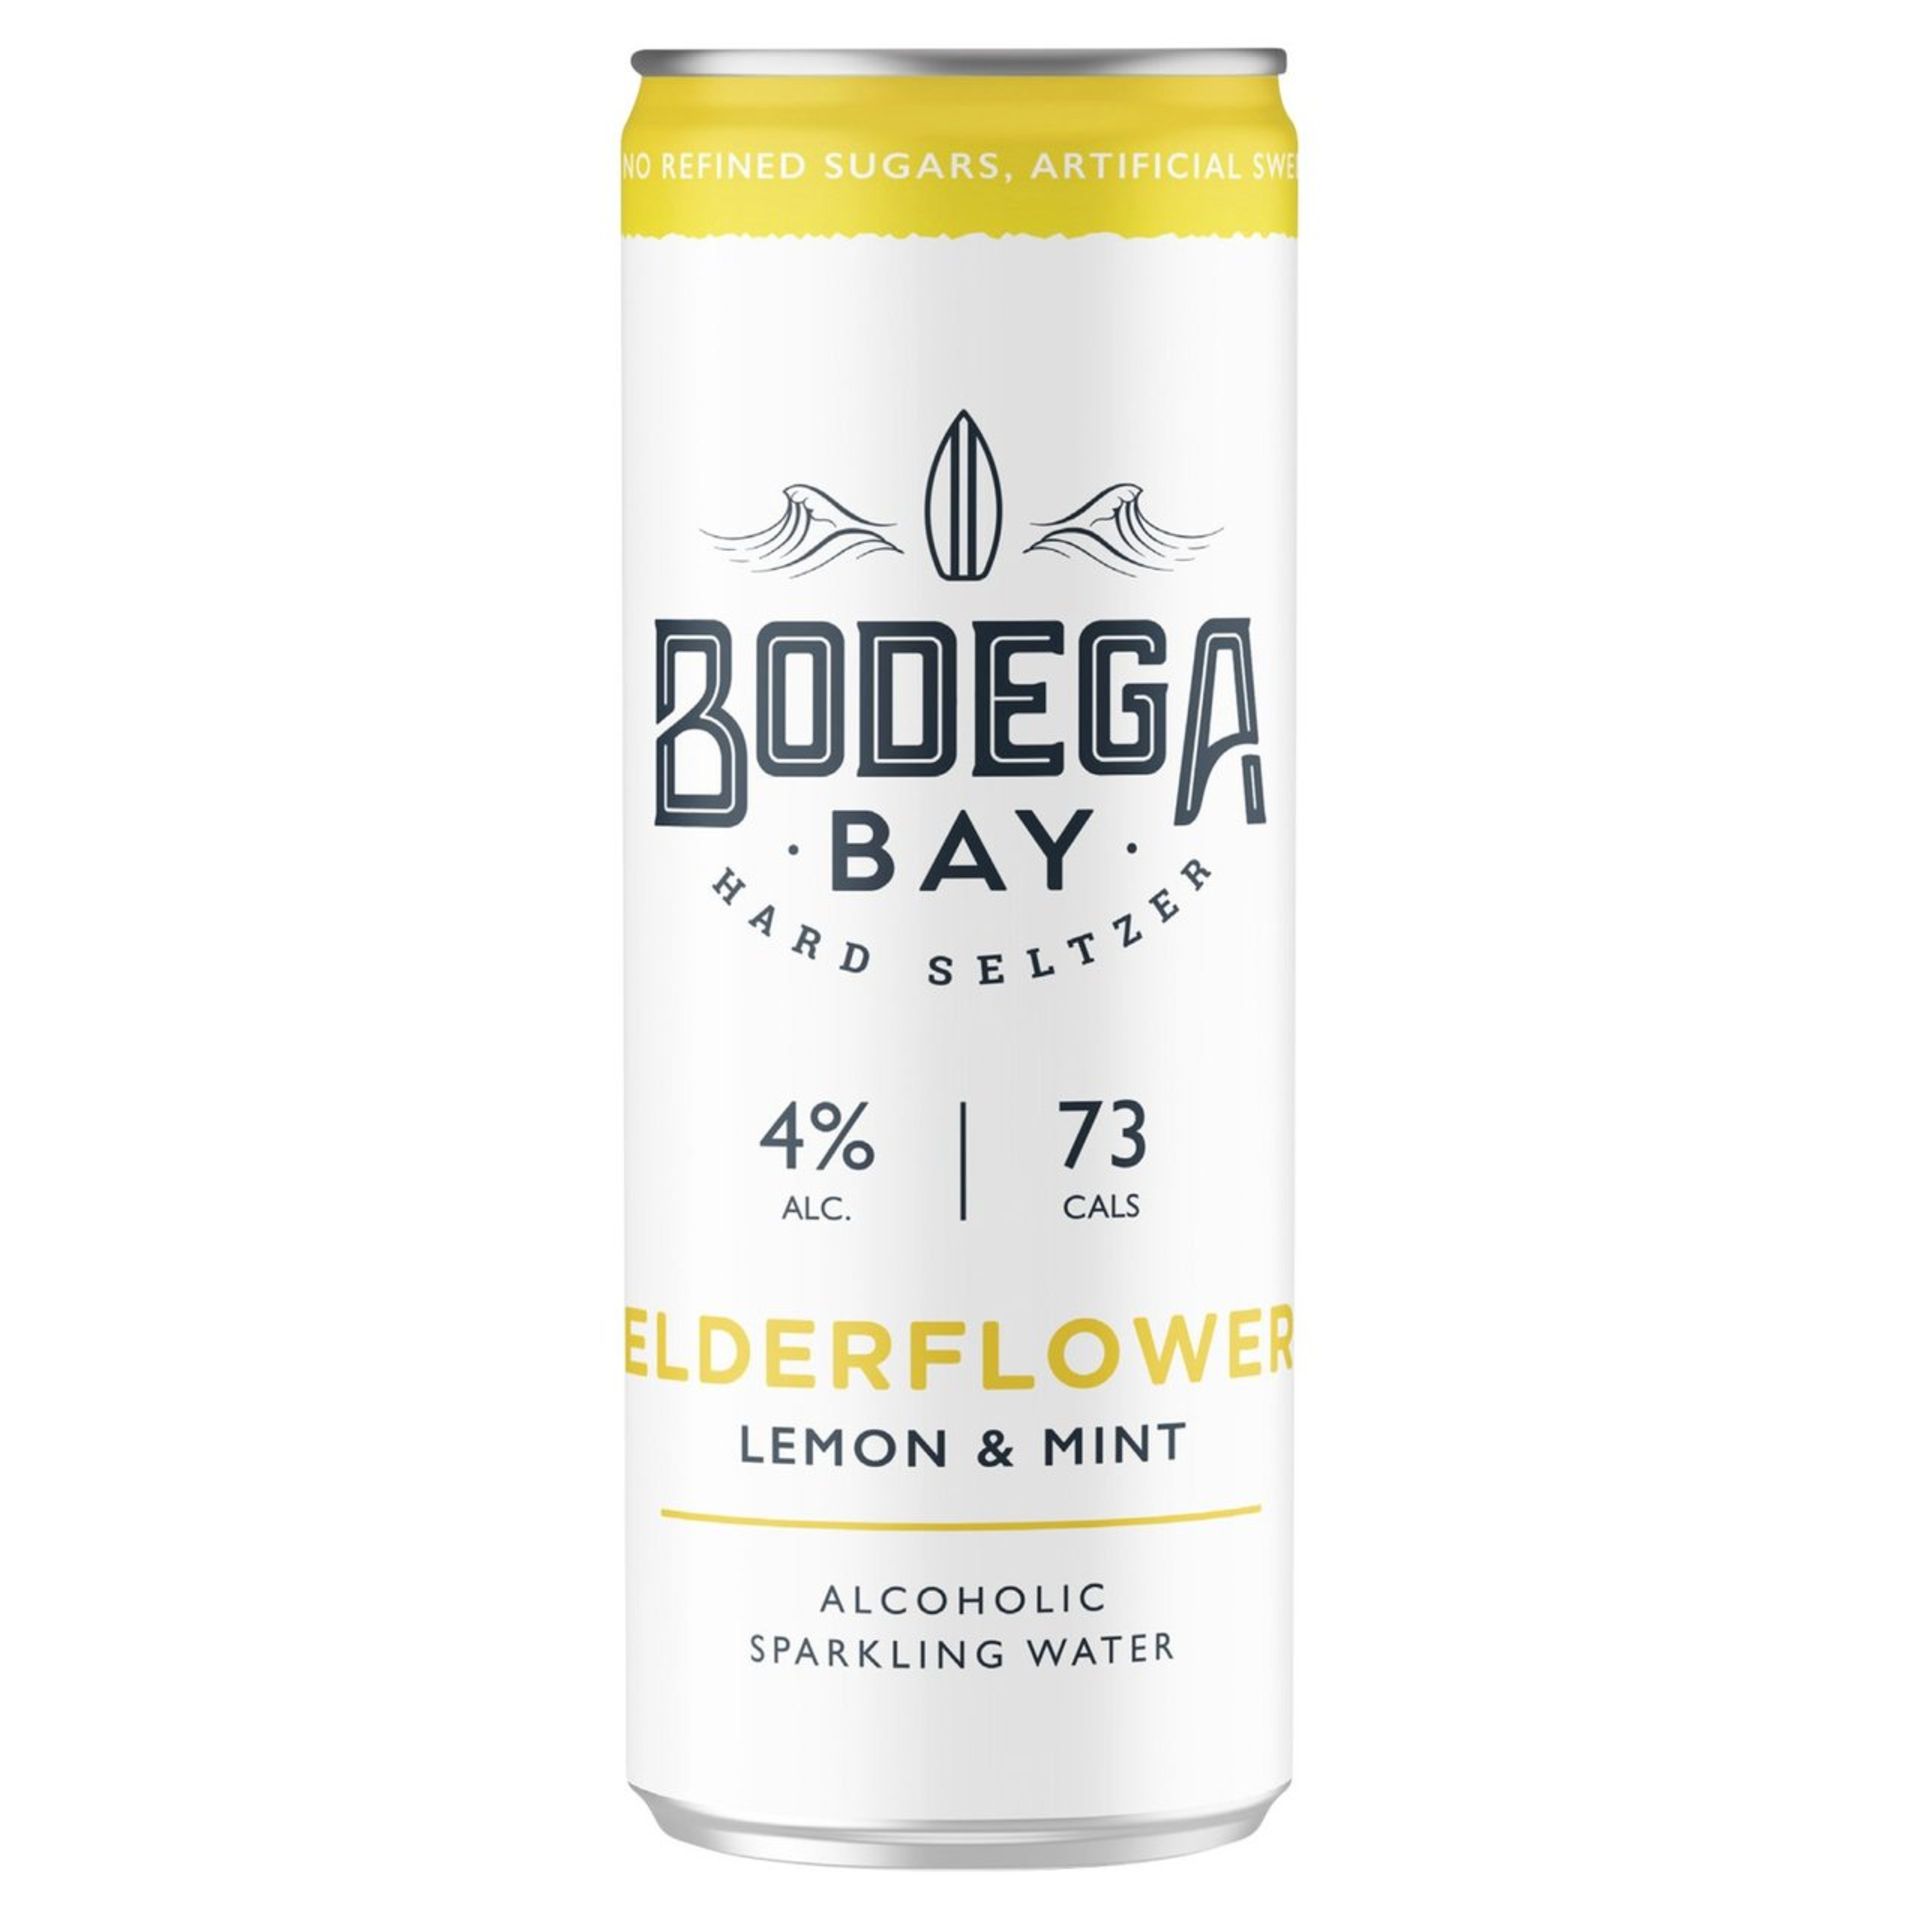 360 x Cans of Bodega Bay Hard Seltzer 250ml Alcoholic Sparkling Water Drinks - Various Flavours - Image 4 of 20